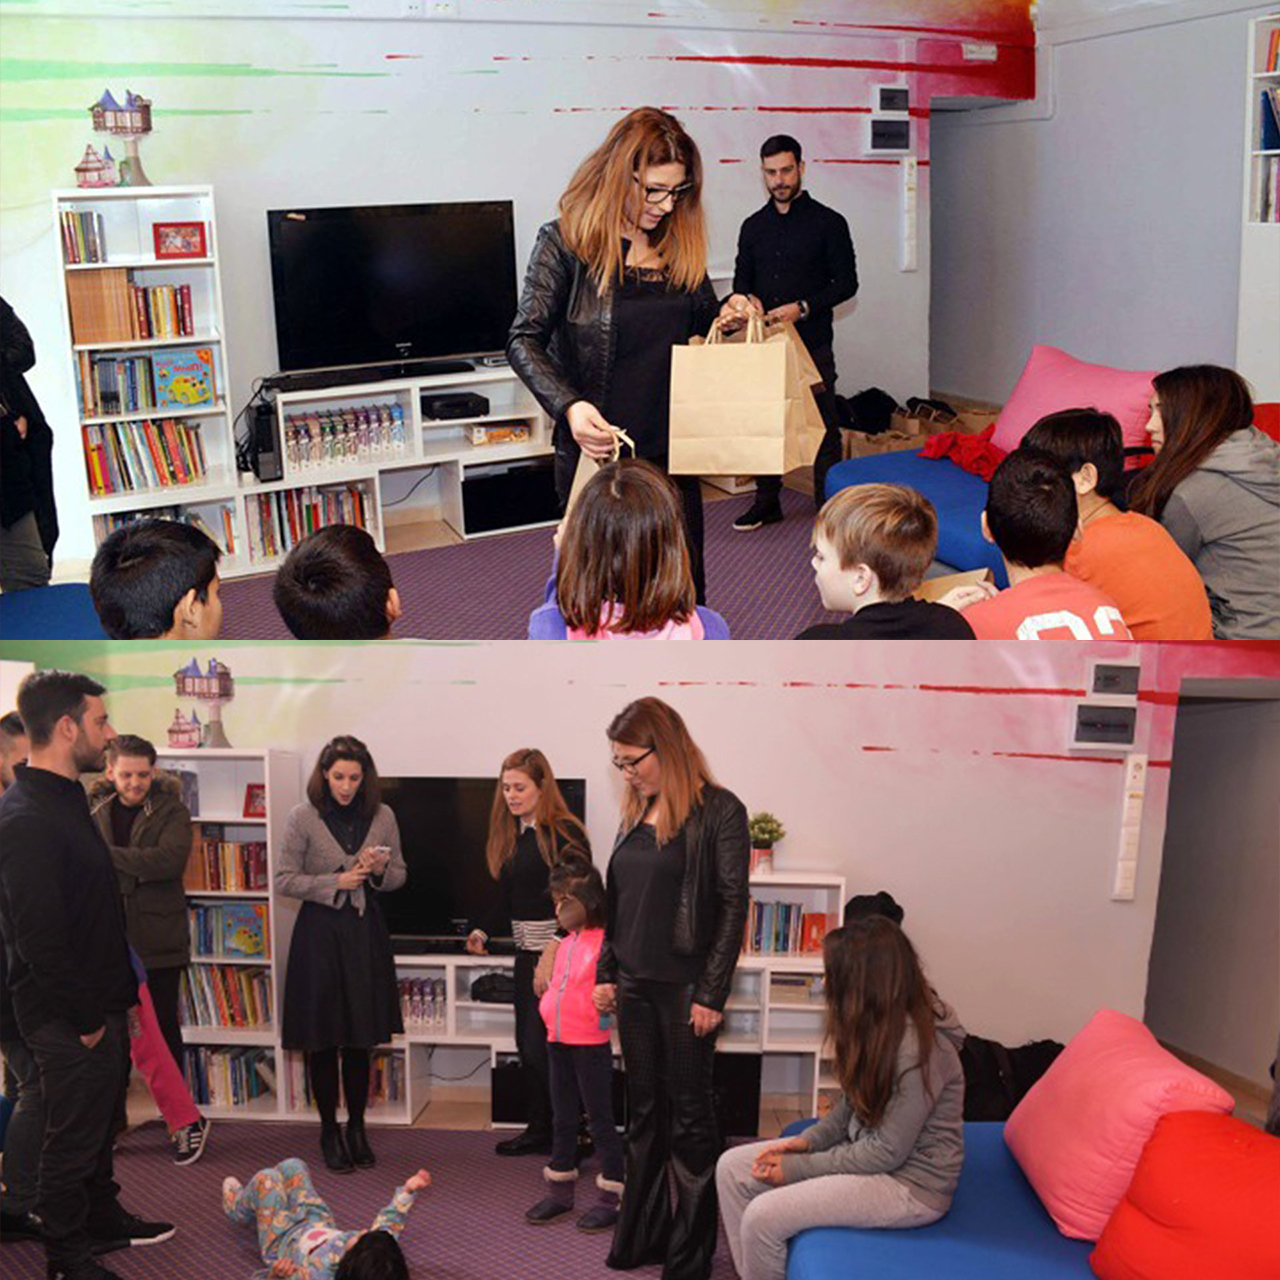 The Colour Day Festival at “The smile of the child” with Elena Paparizou